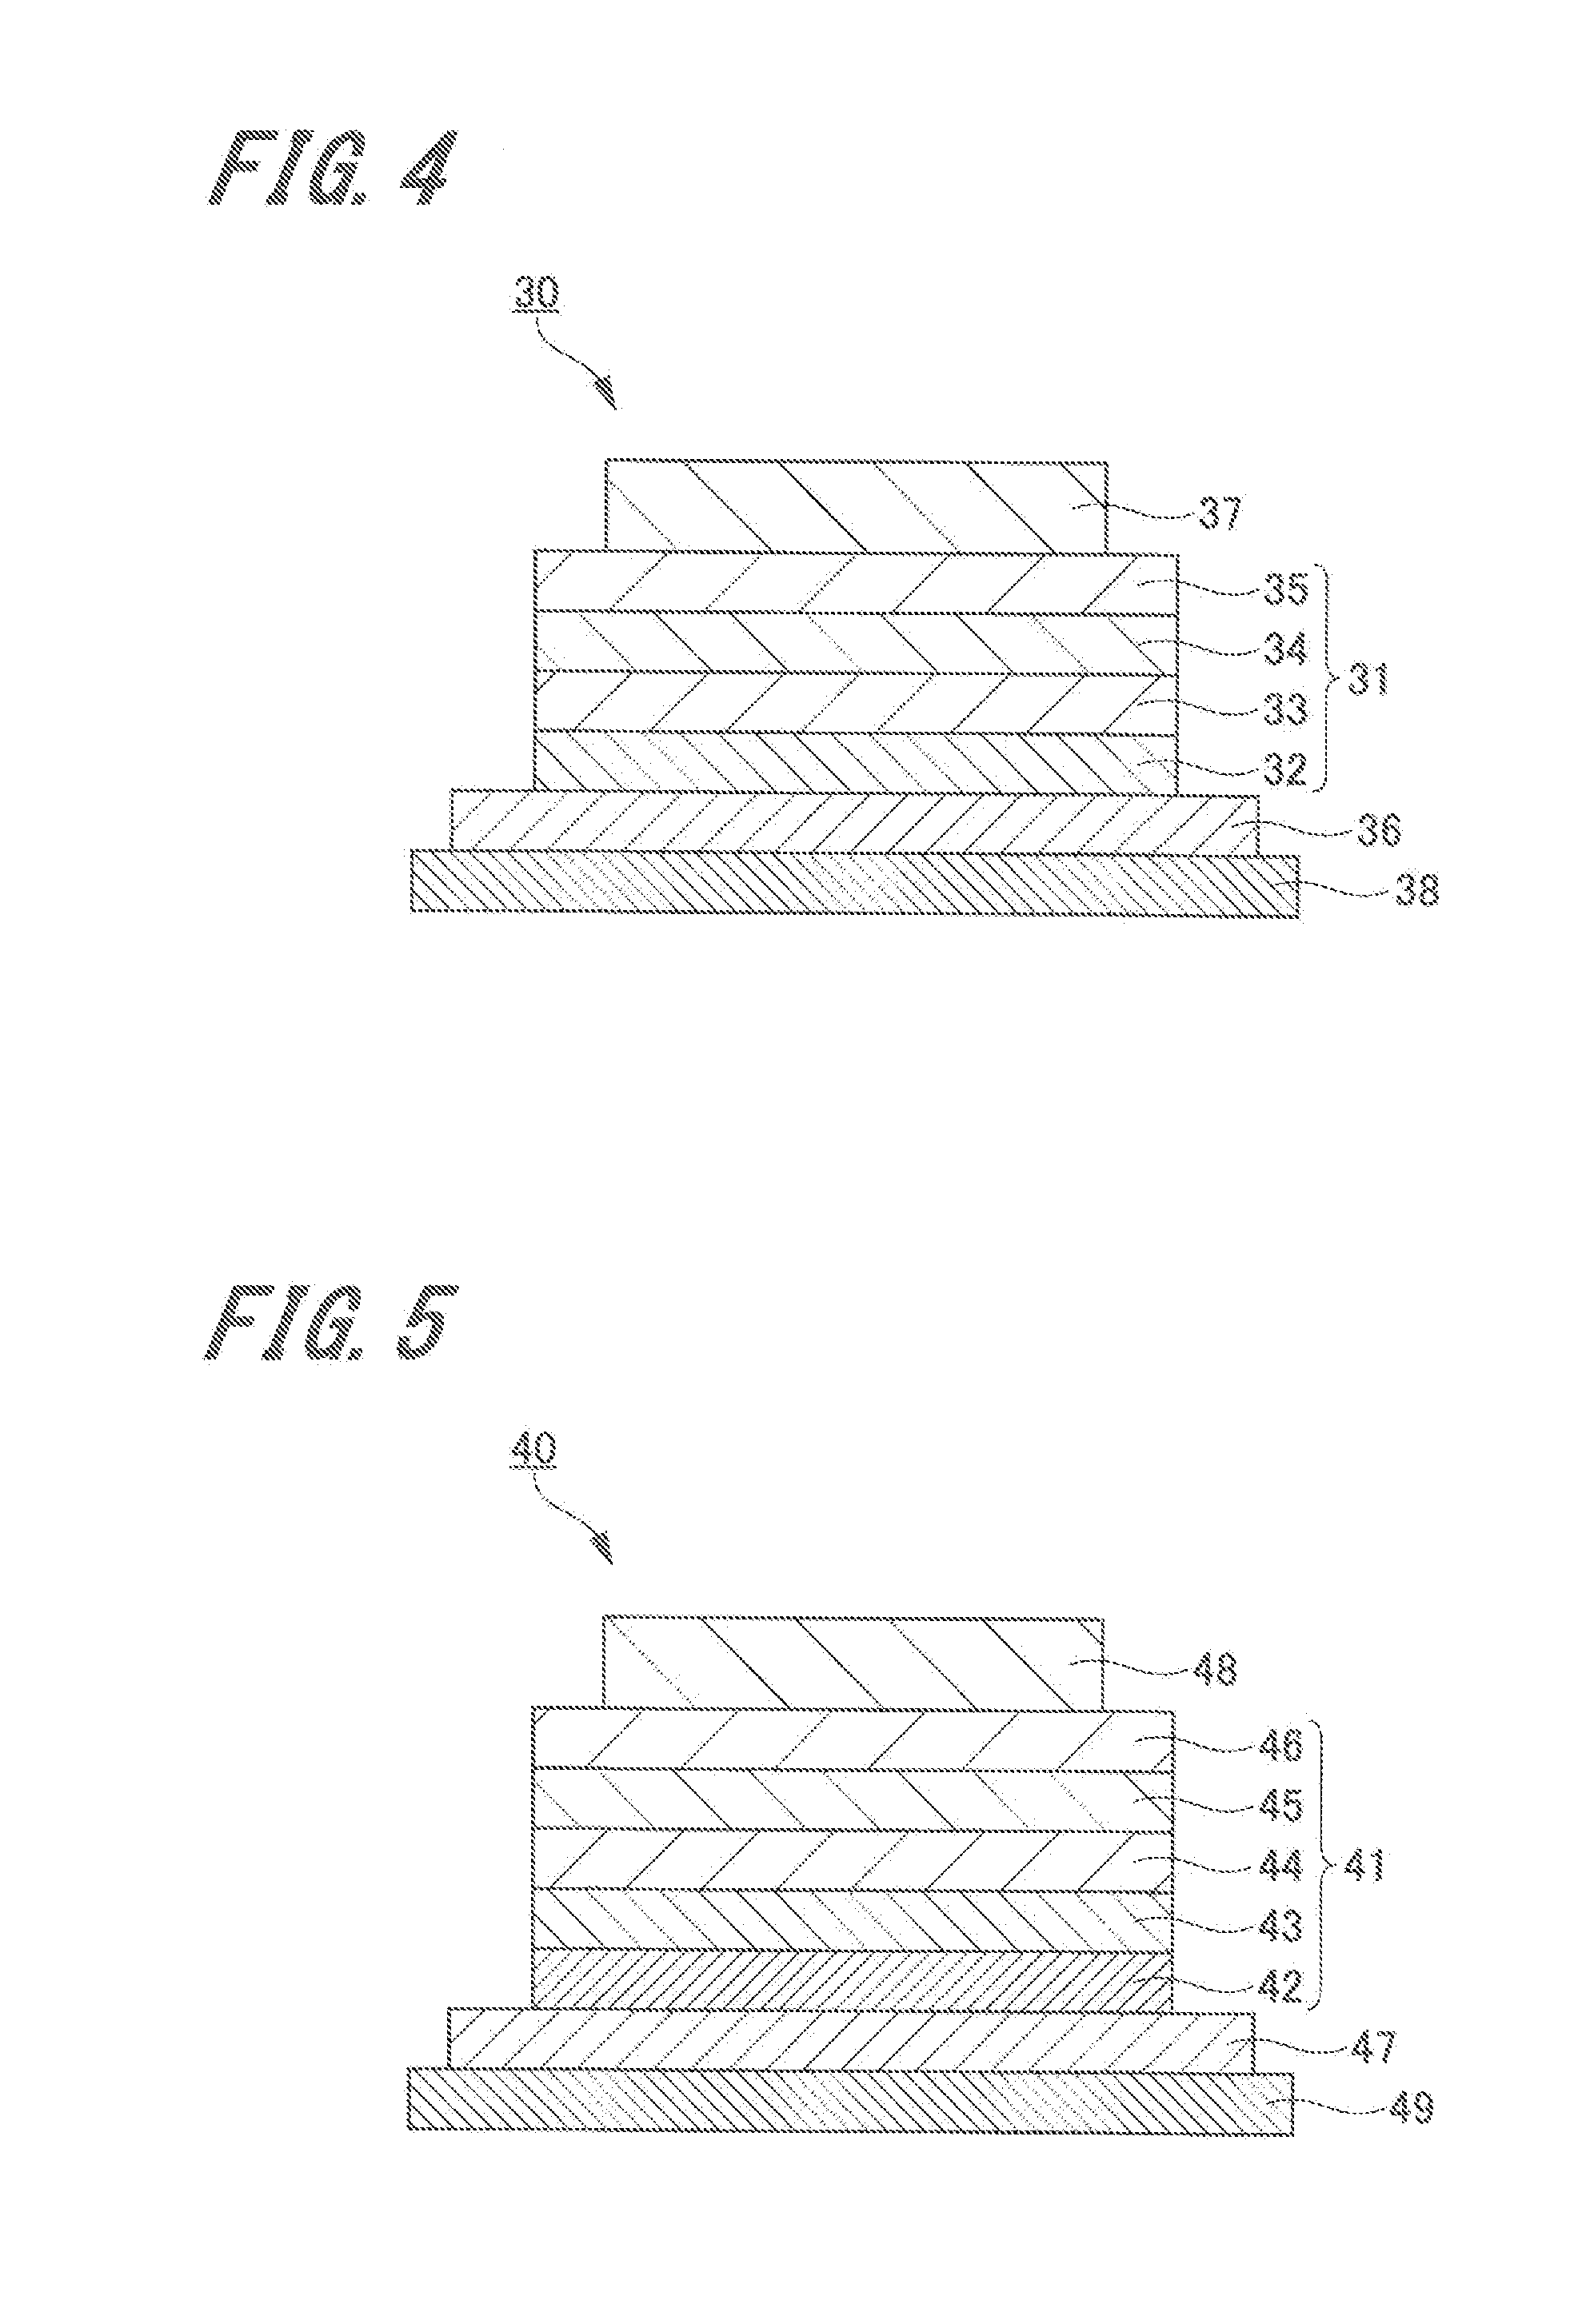 Organic electroluminescent element and electronic device